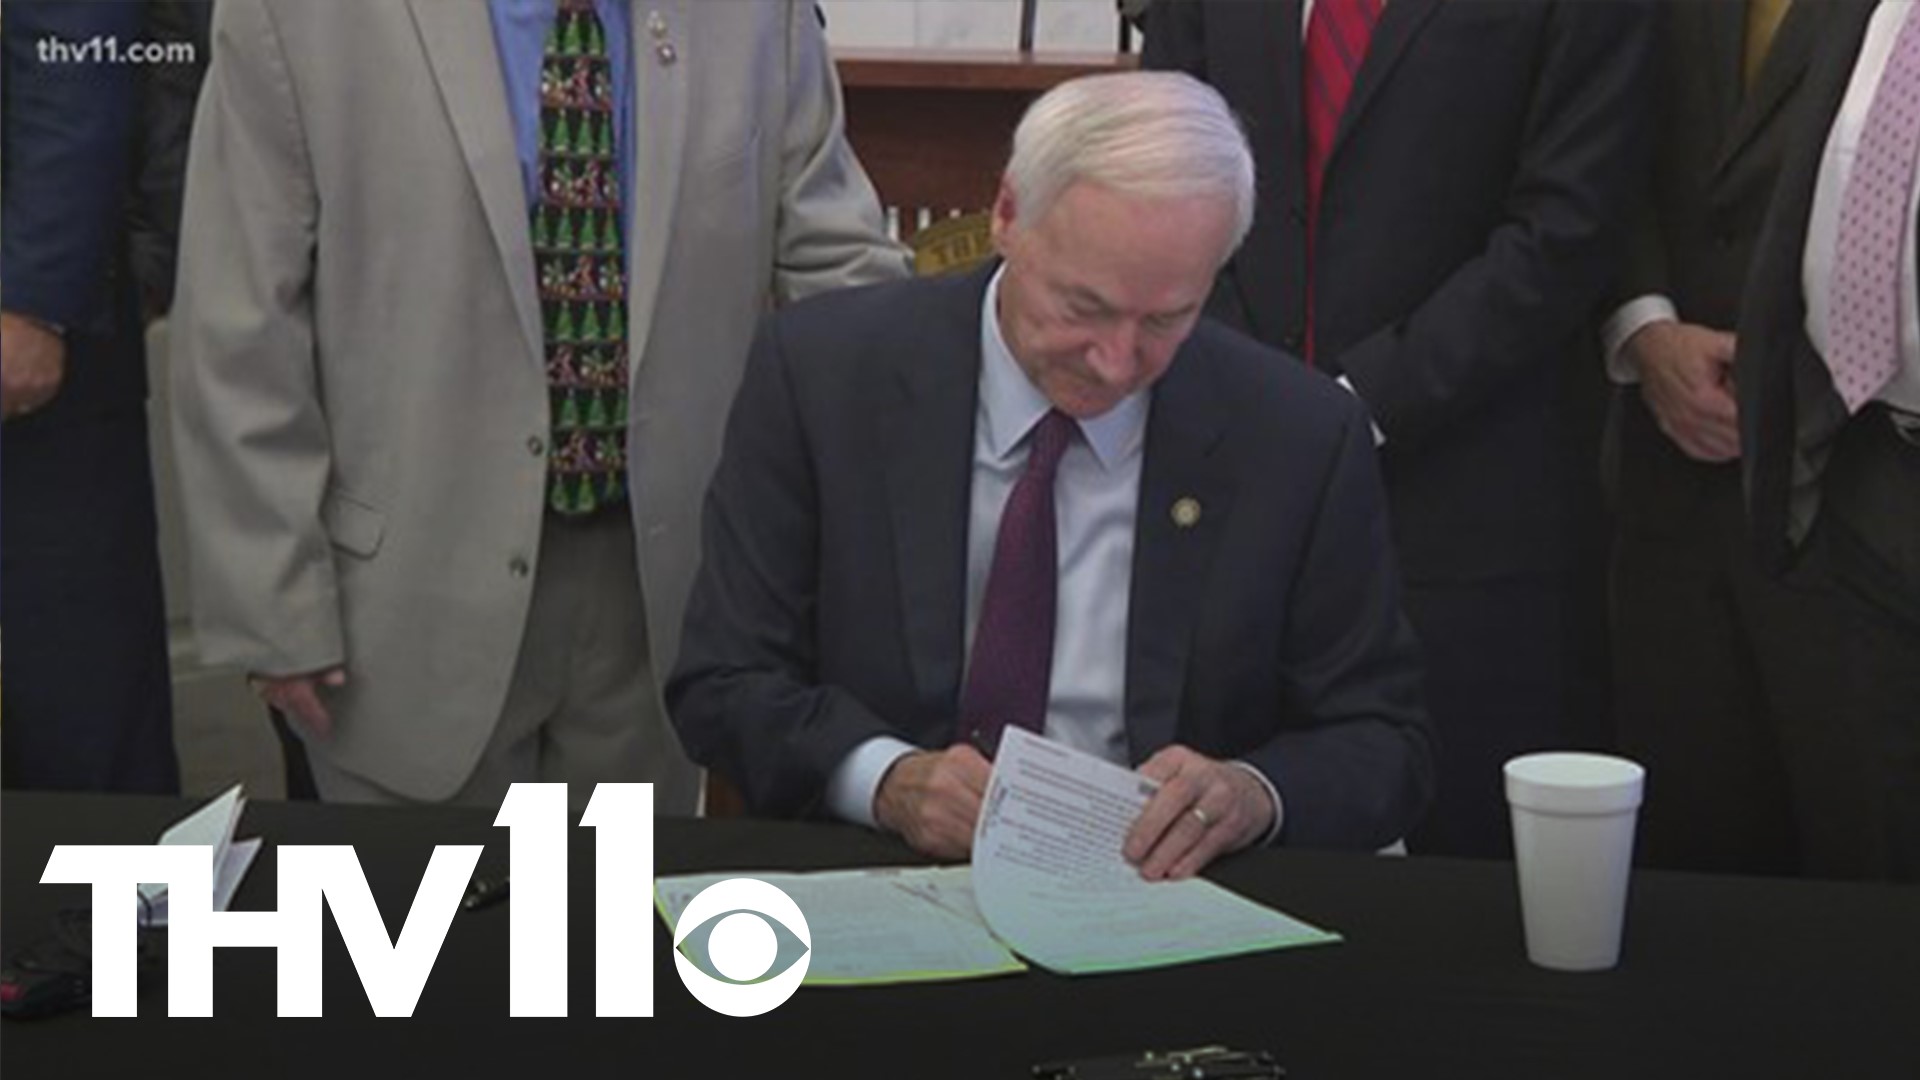 The Senate and House adjourned the special session, and as soon as the bill landed on Gov. Hutchinson's desk, he was ready to sign it.